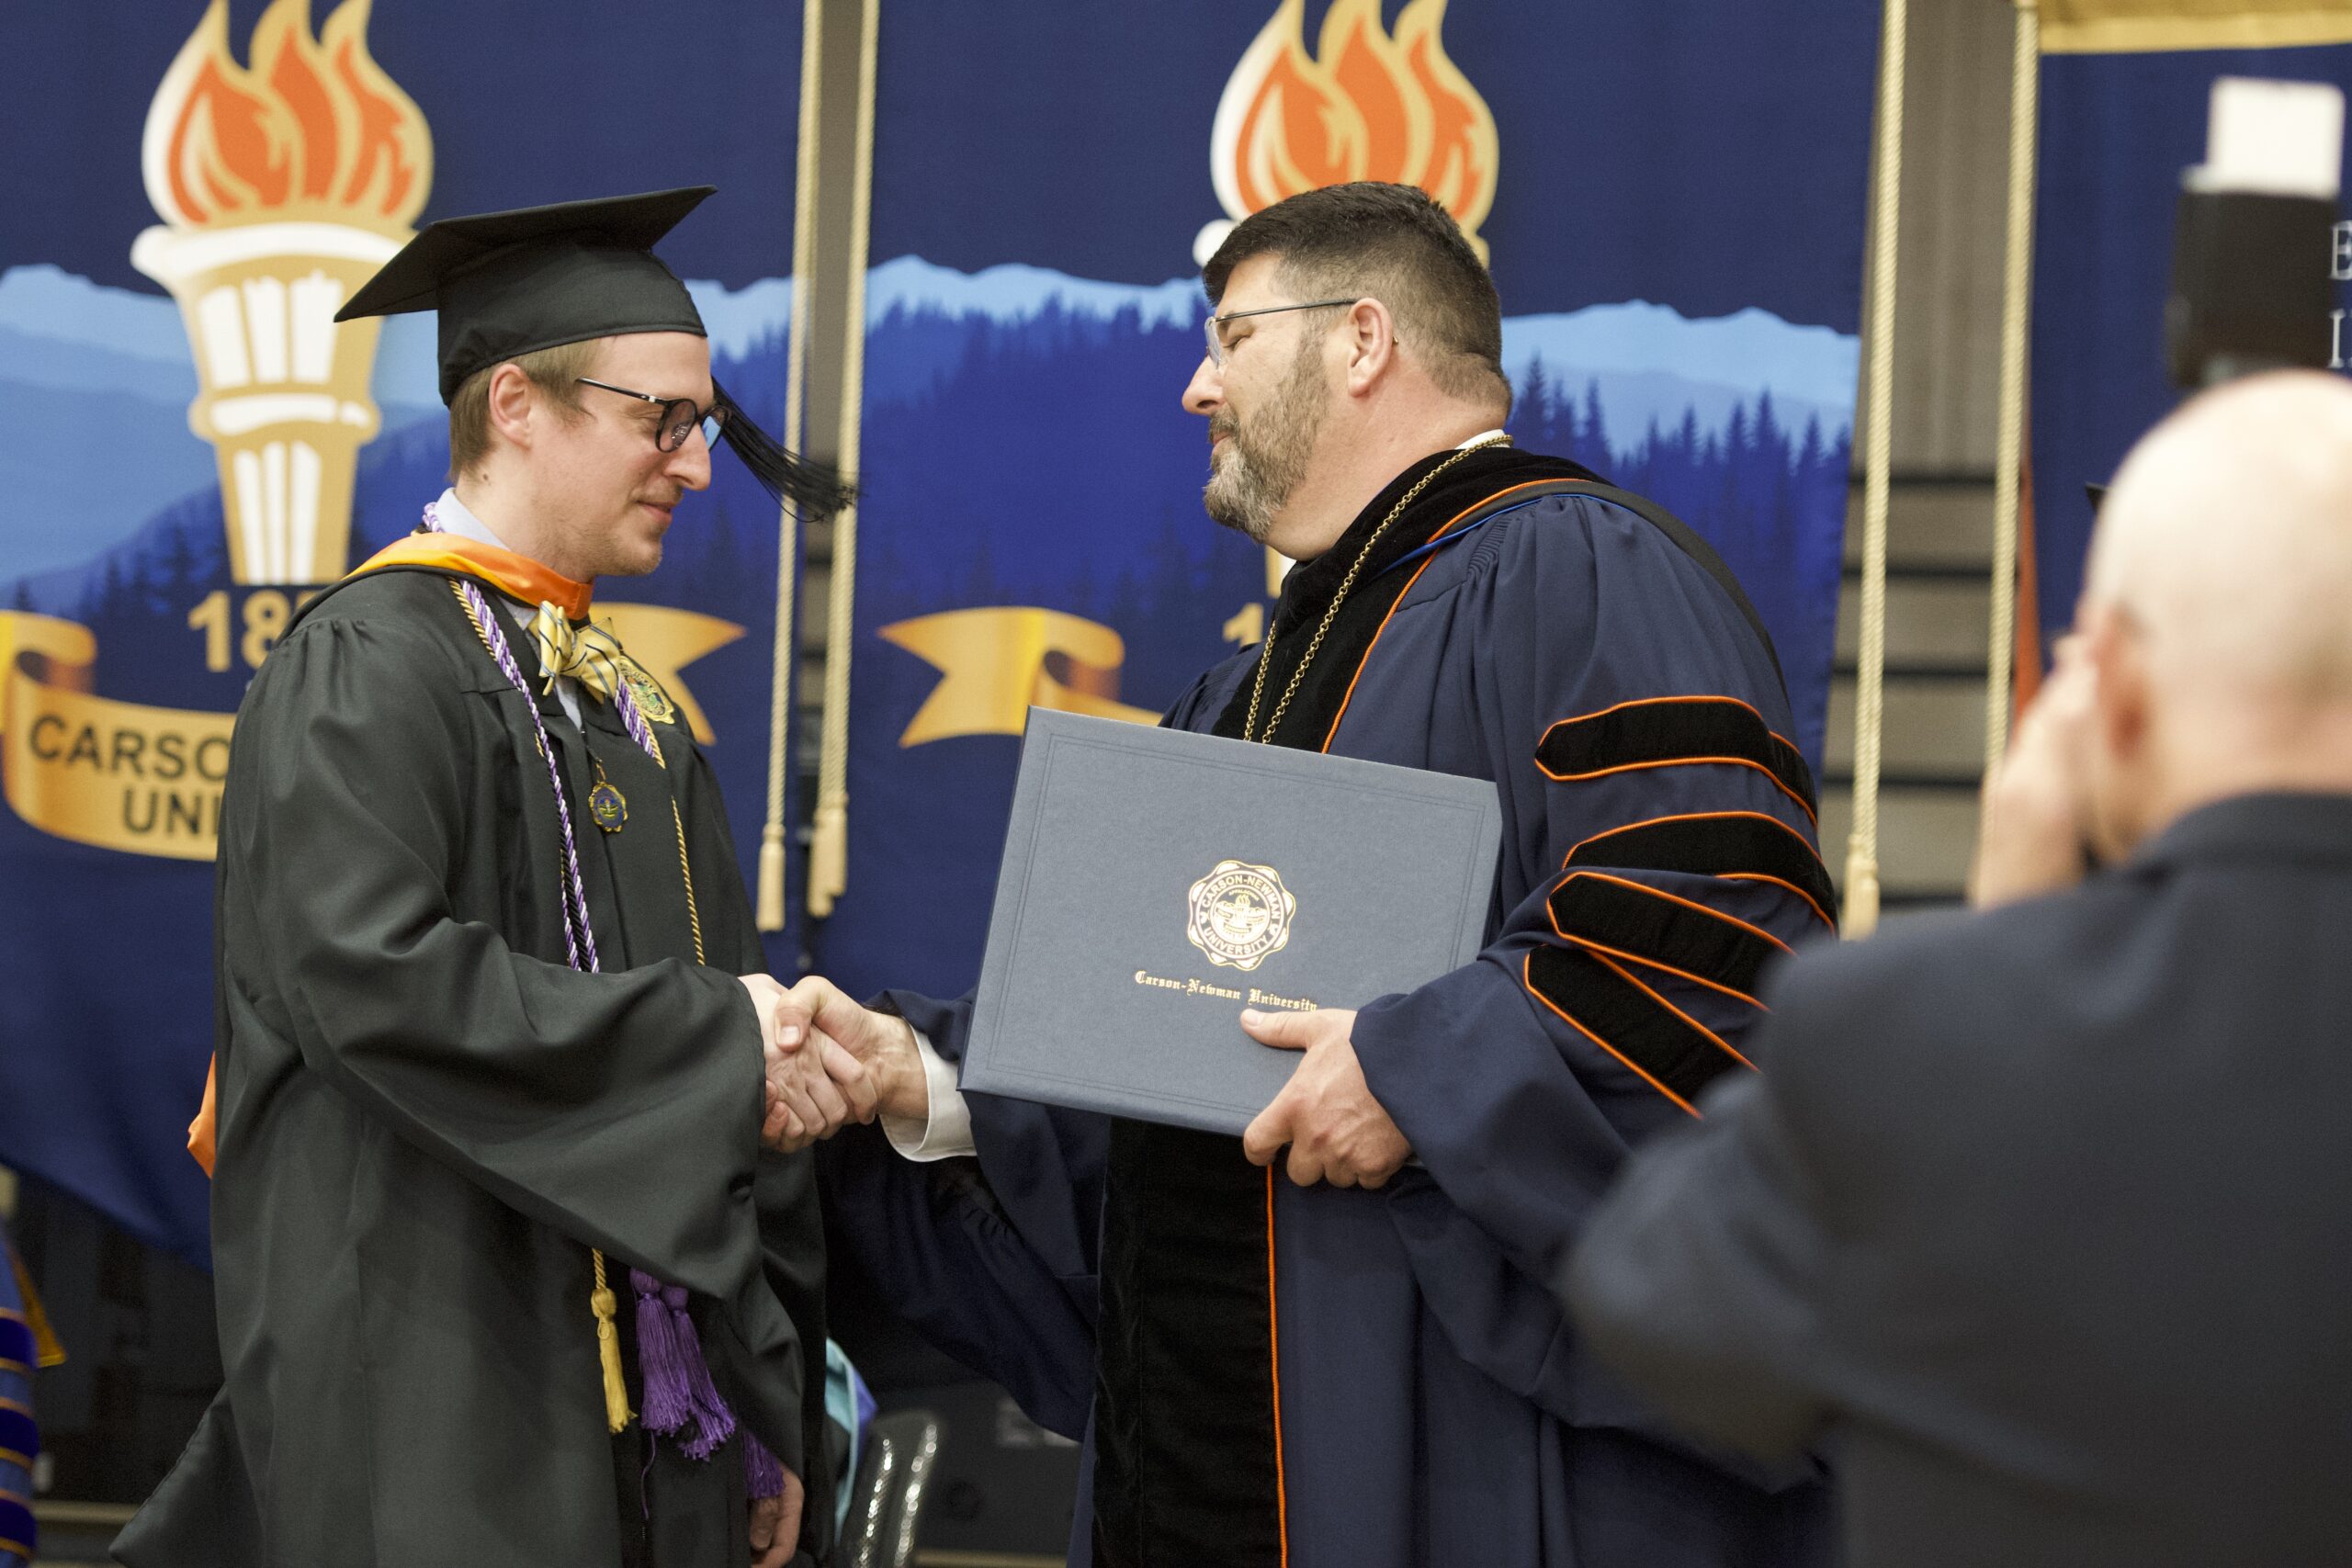 two men wearing black academic robes during a graduation ceremony